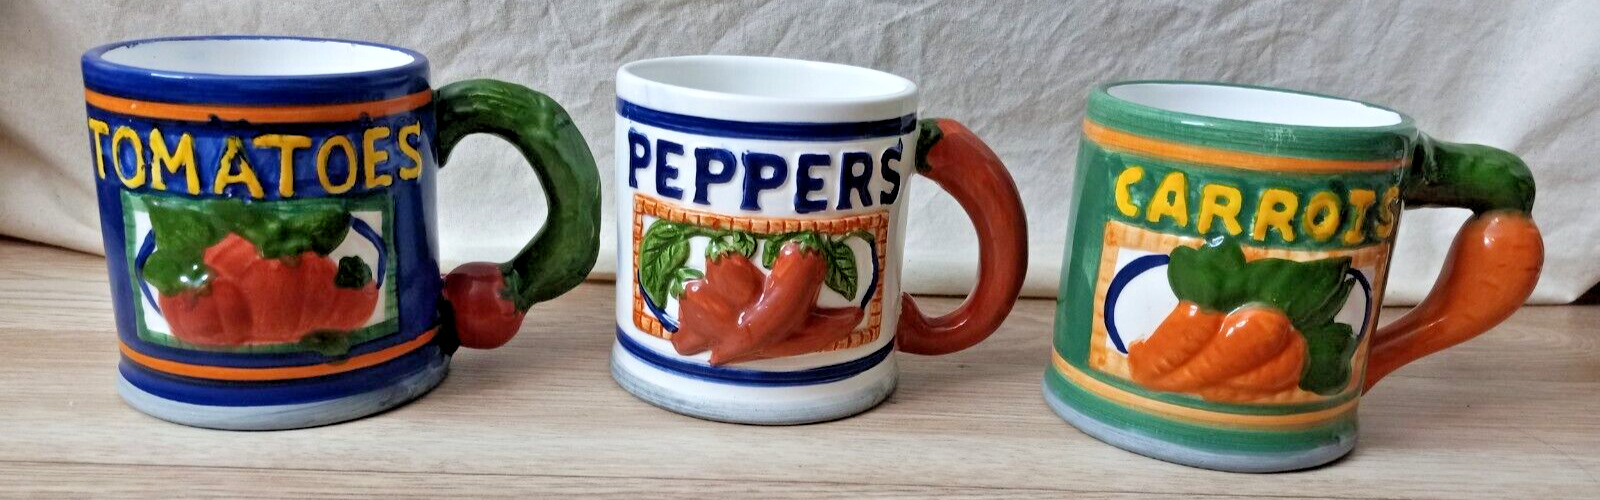 3x Collectable Garden Mugs Tomatoes Peppers Carrots Coffee Tea